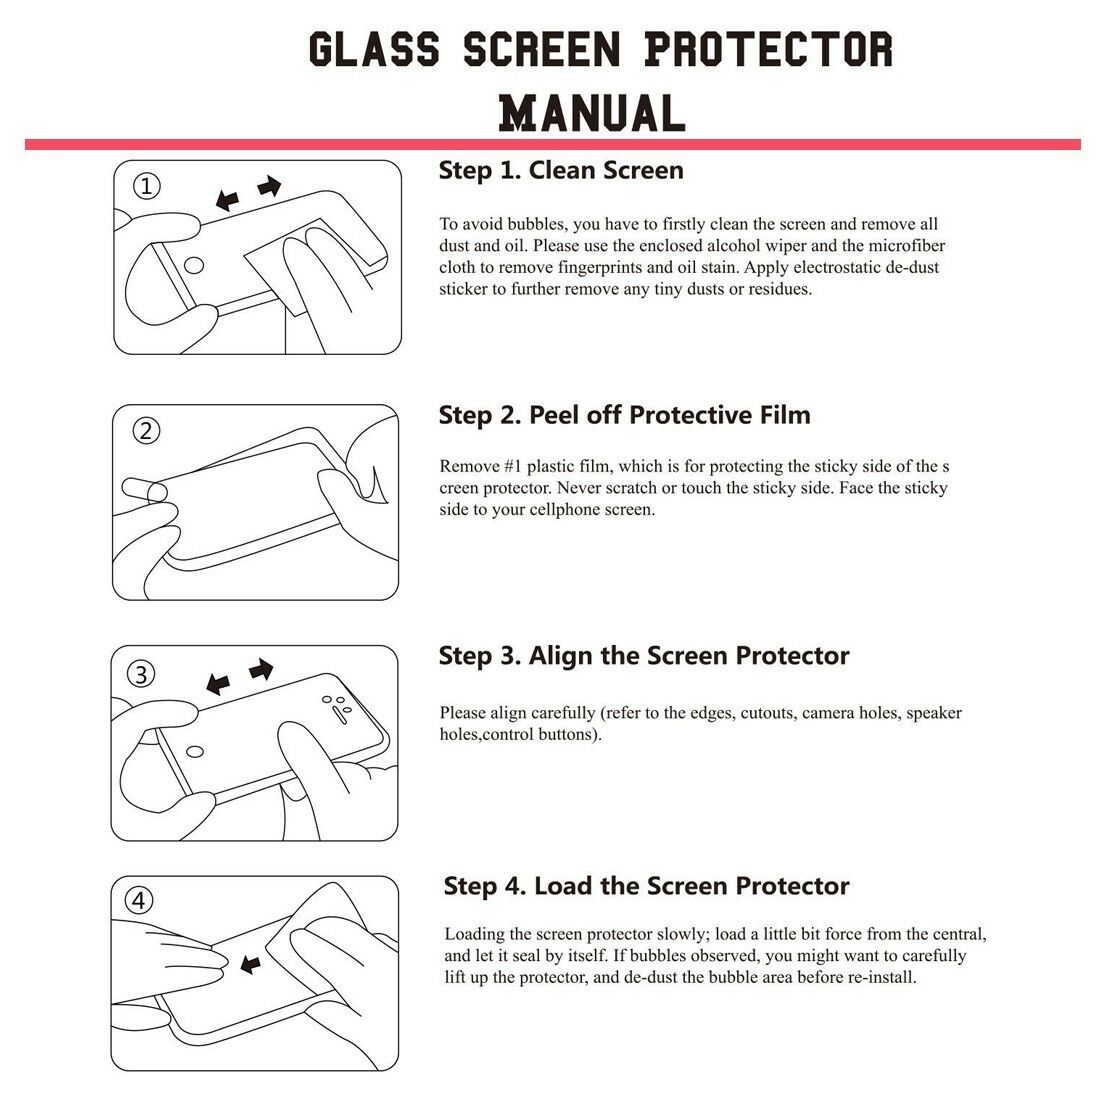 Samsung Galaxy M10 - Premium Tempered Glass for [product_price] - First Help Tech